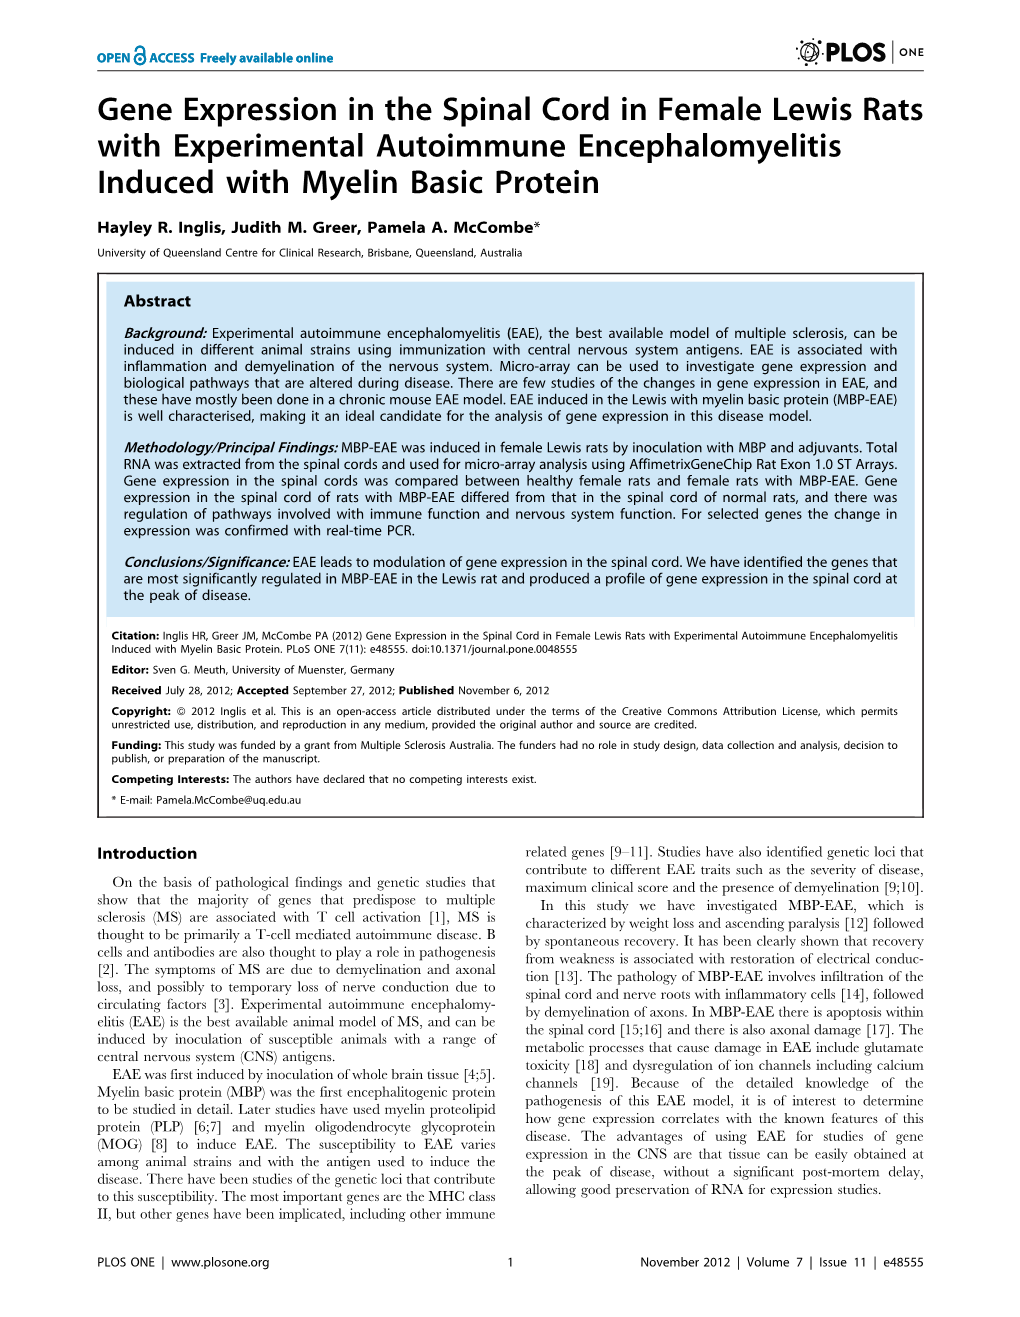 Gene Expression in the Spinal Cord in Female Lewis Rats with Experimental Autoimmune Encephalomyelitis Induced with Myelin Basic Protein